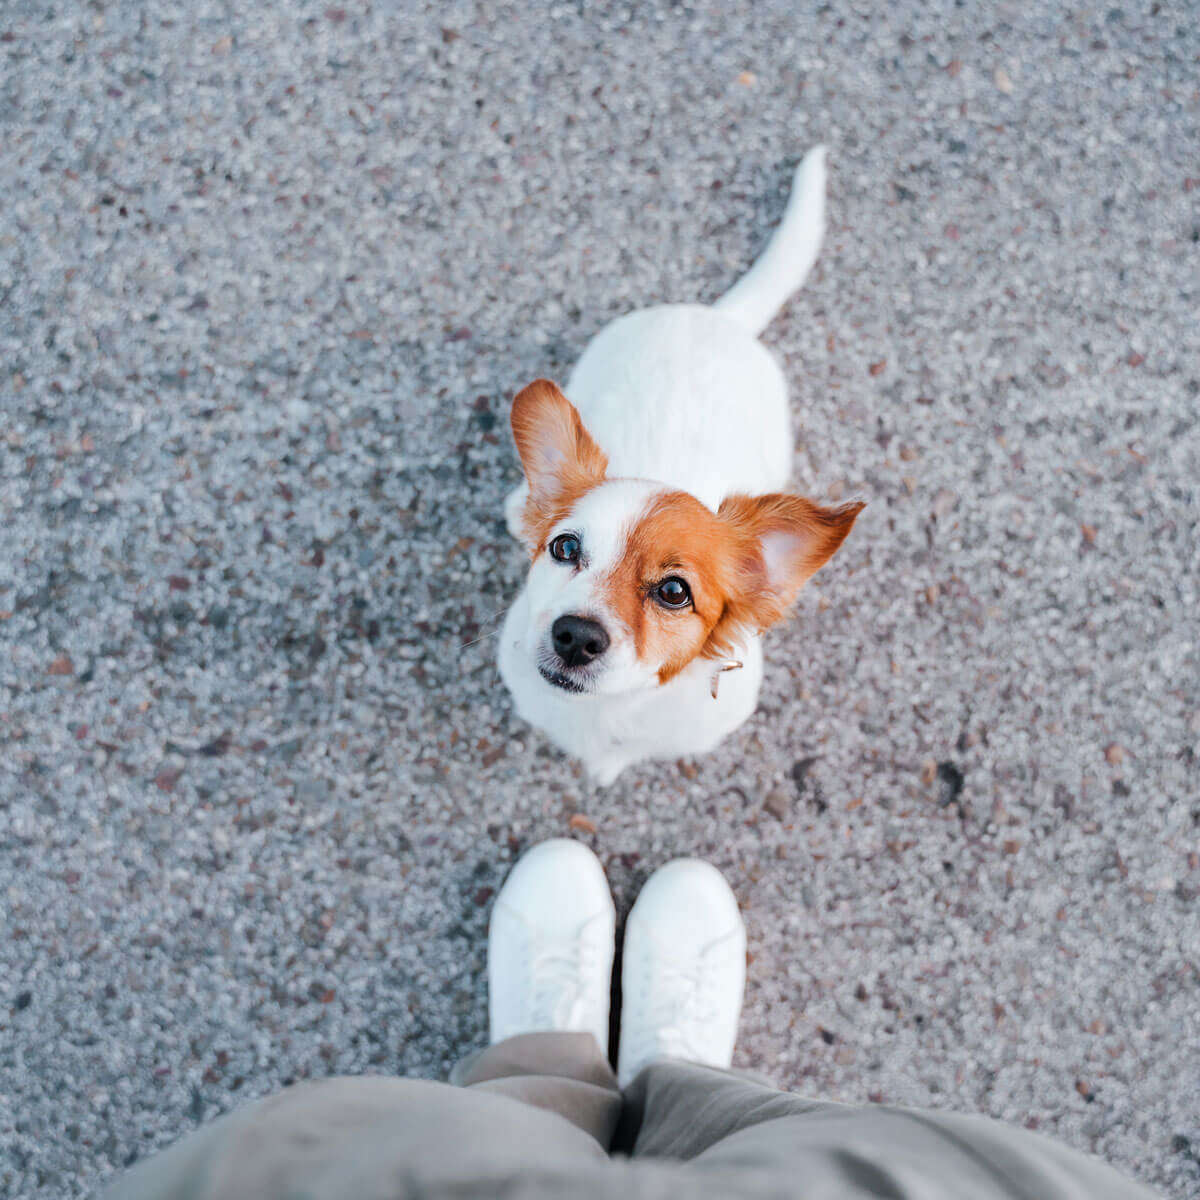 Small Dog at Person's Feet